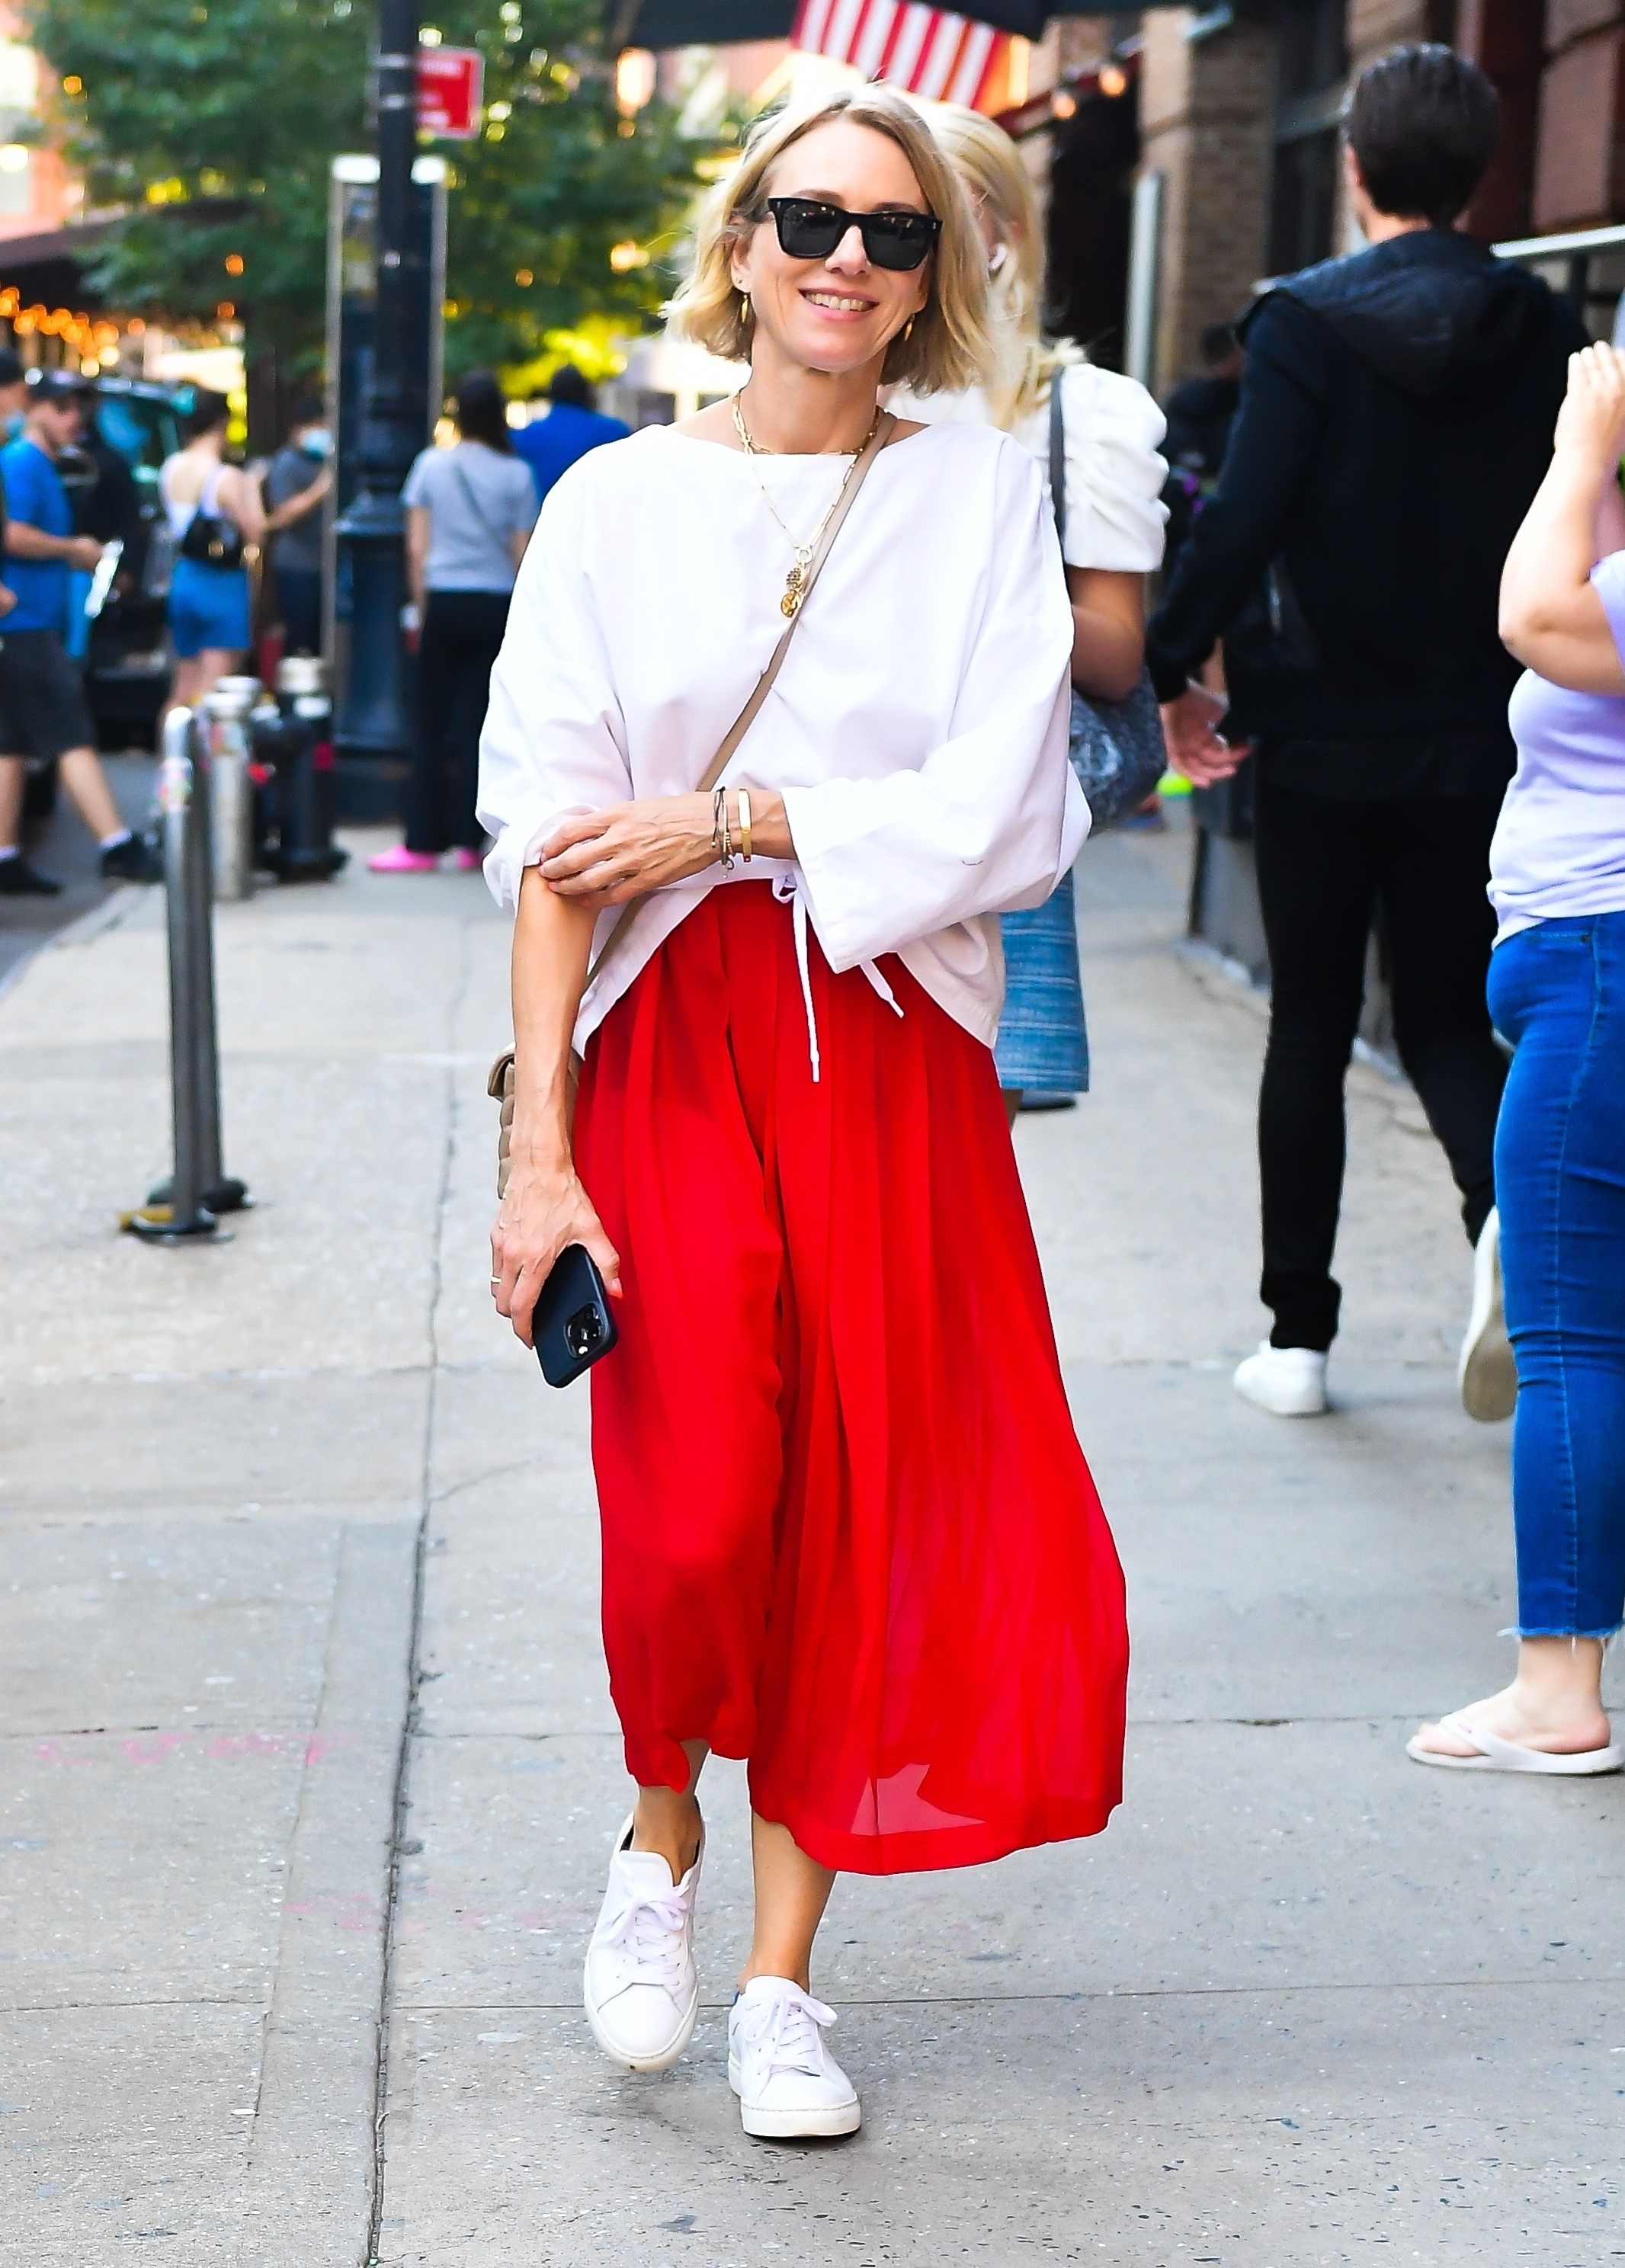 Naomi Watts was photographed when she arrived at an exclusive restaurant in New York, where she met a group of friends to eat.  She wore a red skirt with a white camisole that she paired with her leather sneakers.  In addition, she wore a shoulder bag and sunglasses.